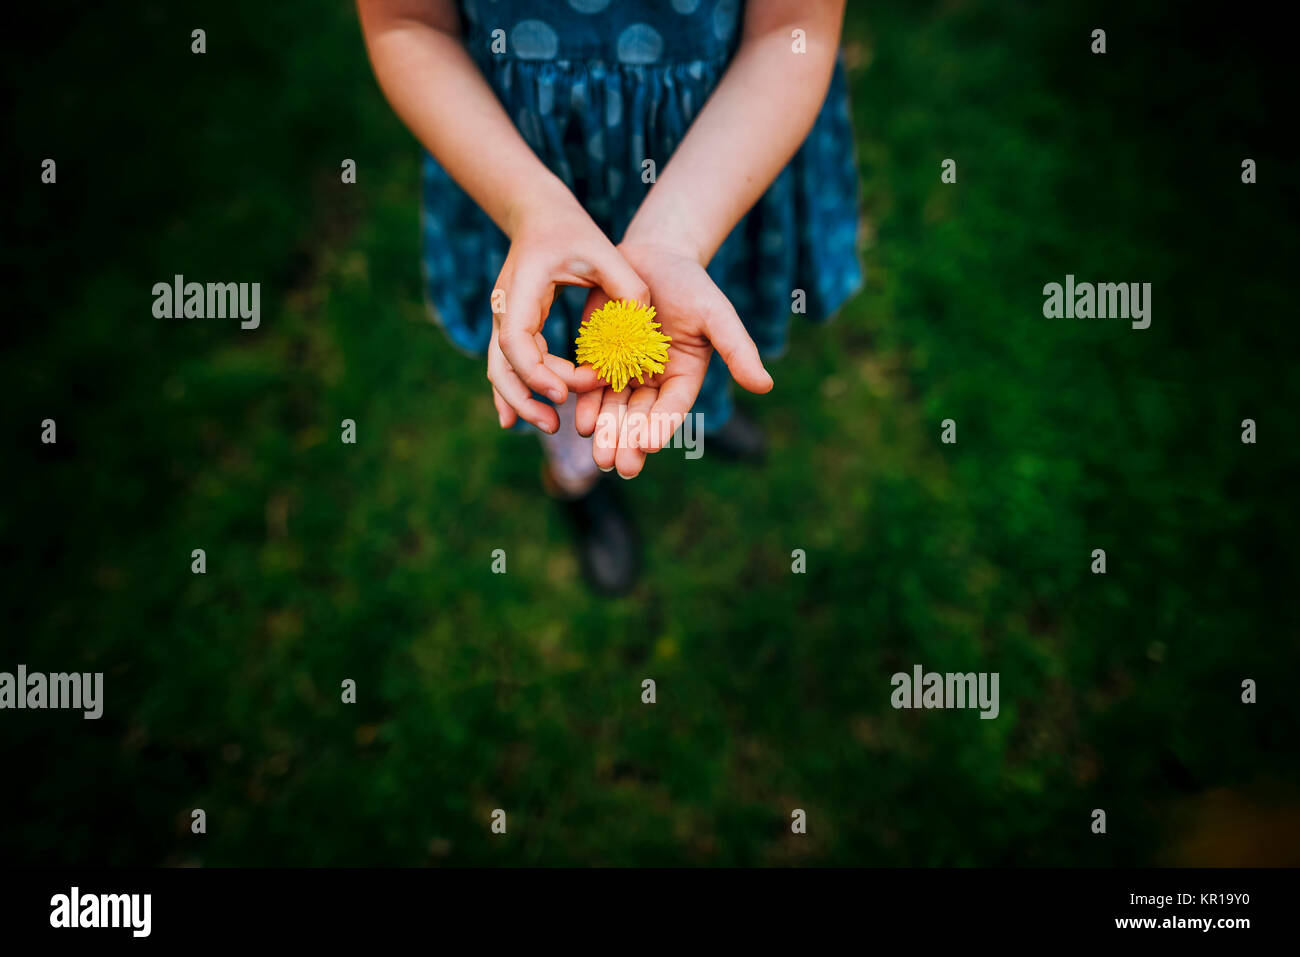 Overhead view of young girl holding a dandelion flower Stock Photo